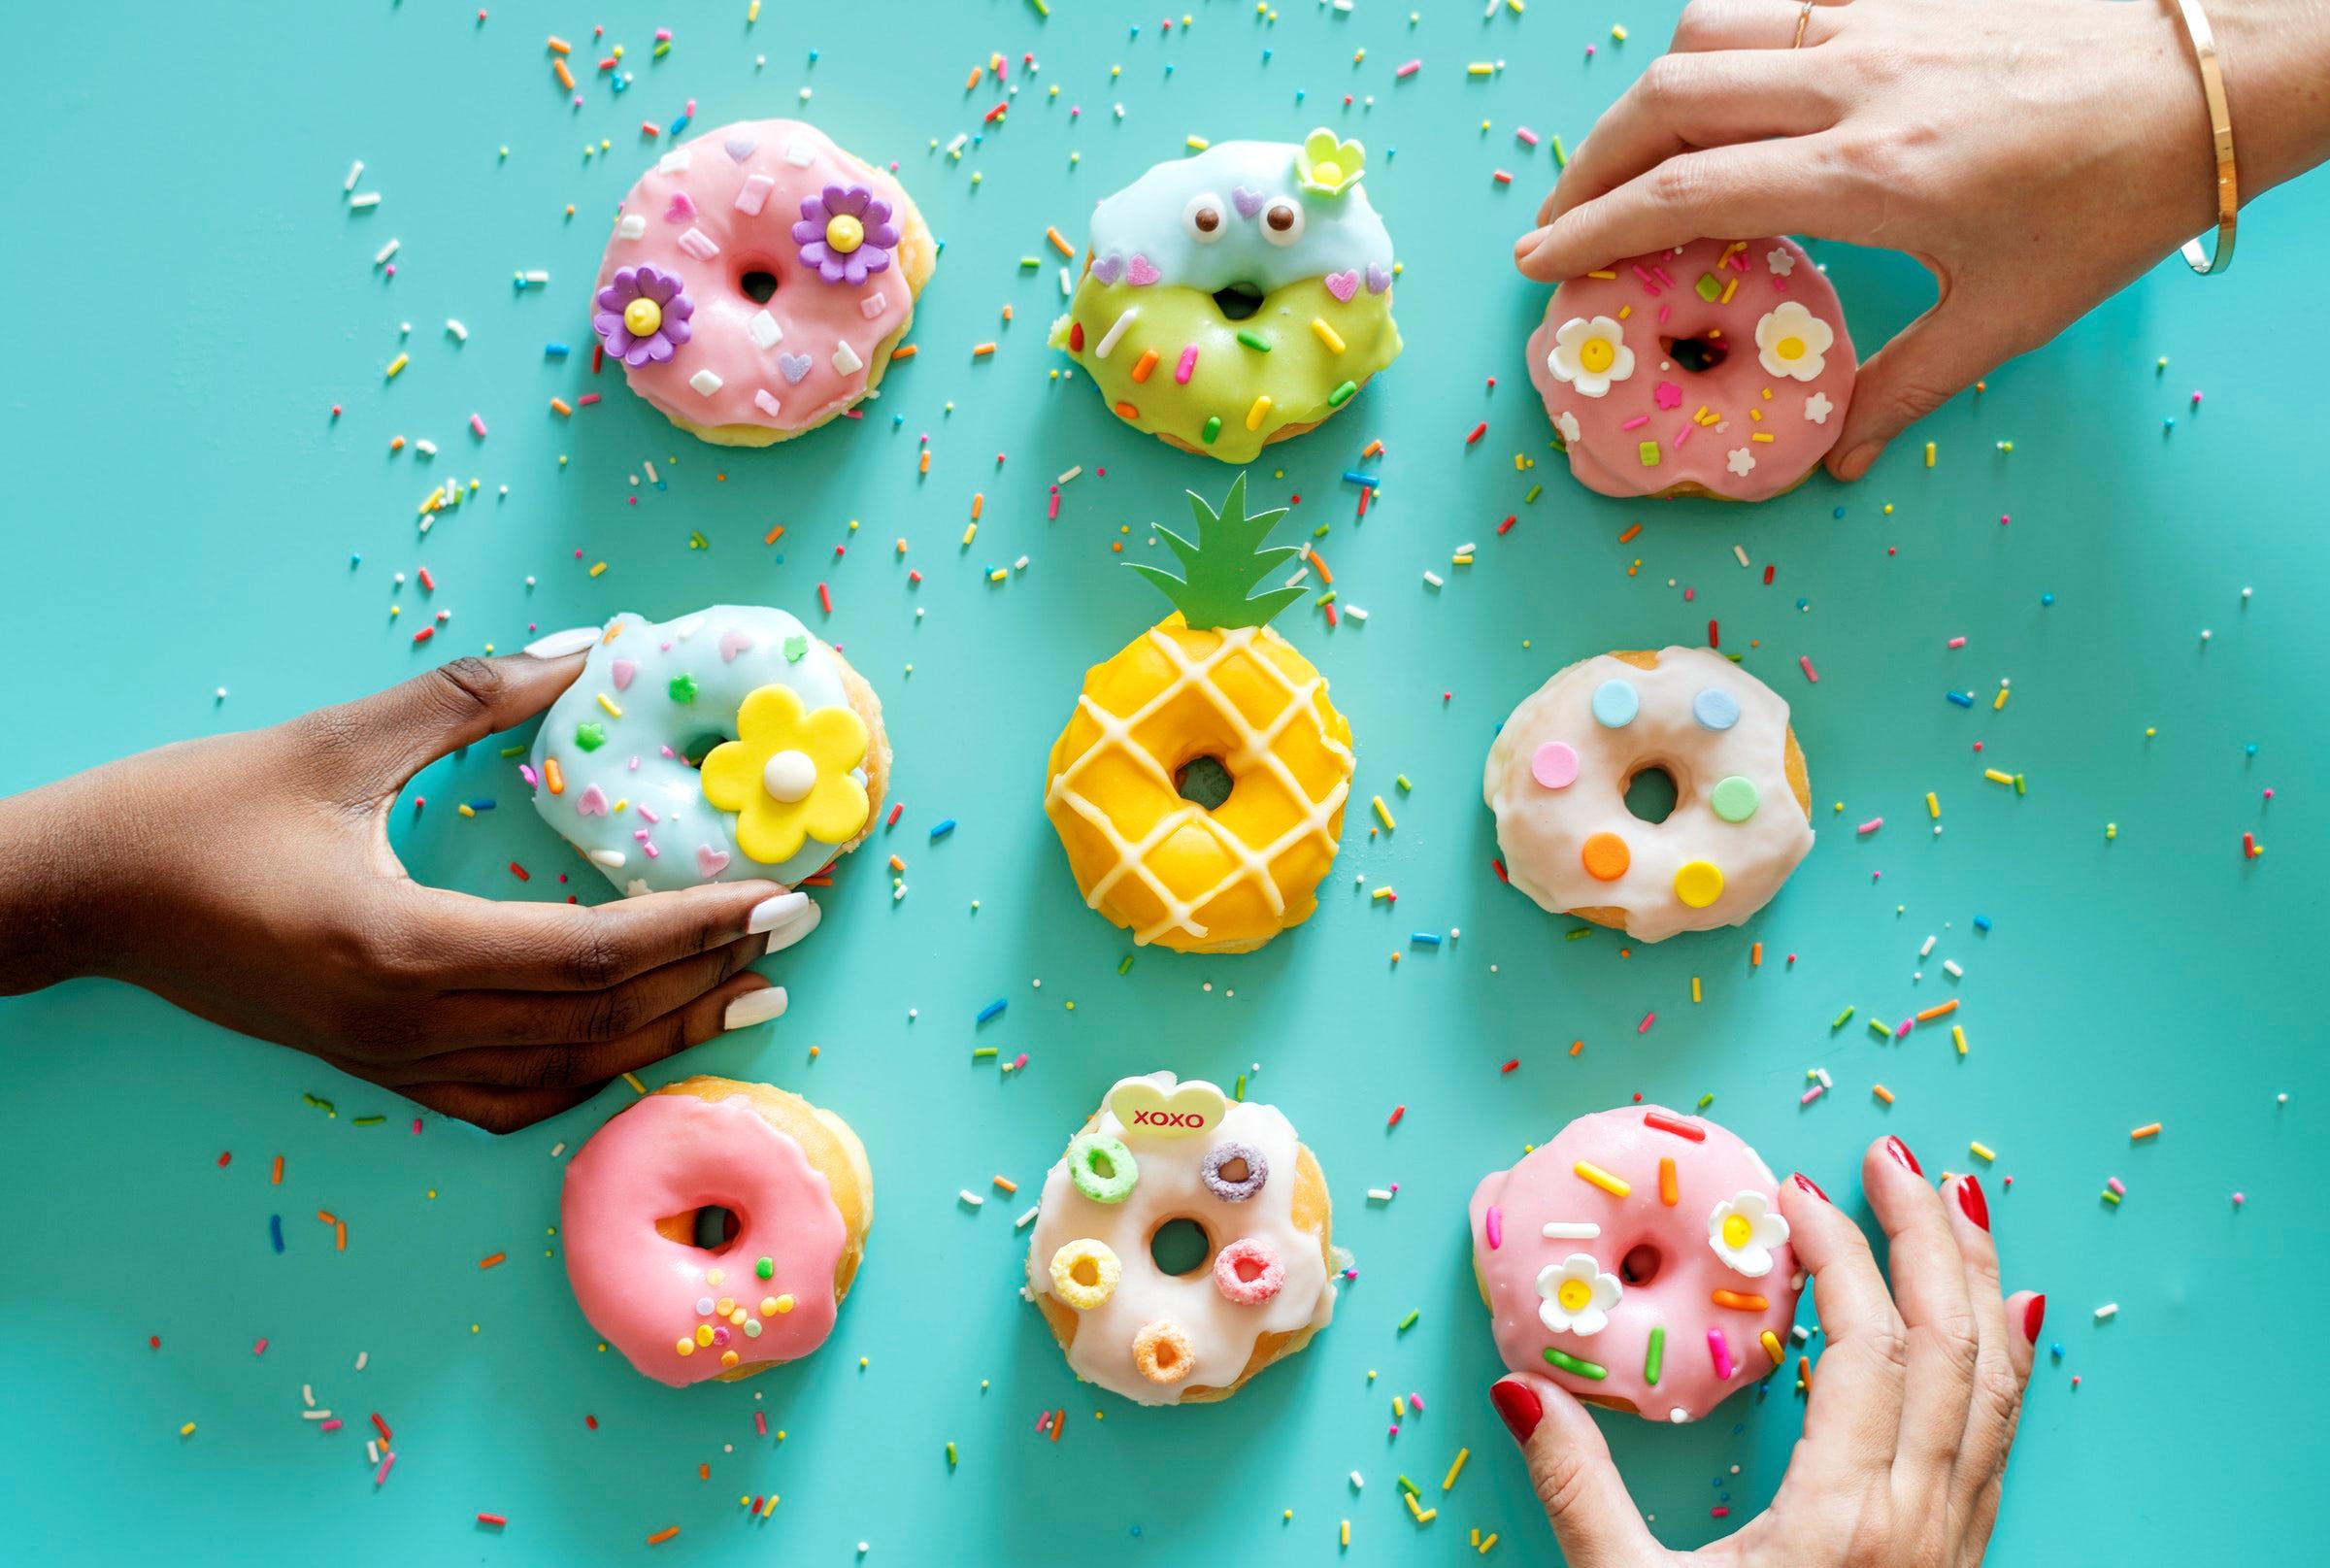 General 2400x1615 hands food sweets donut closeup simple background